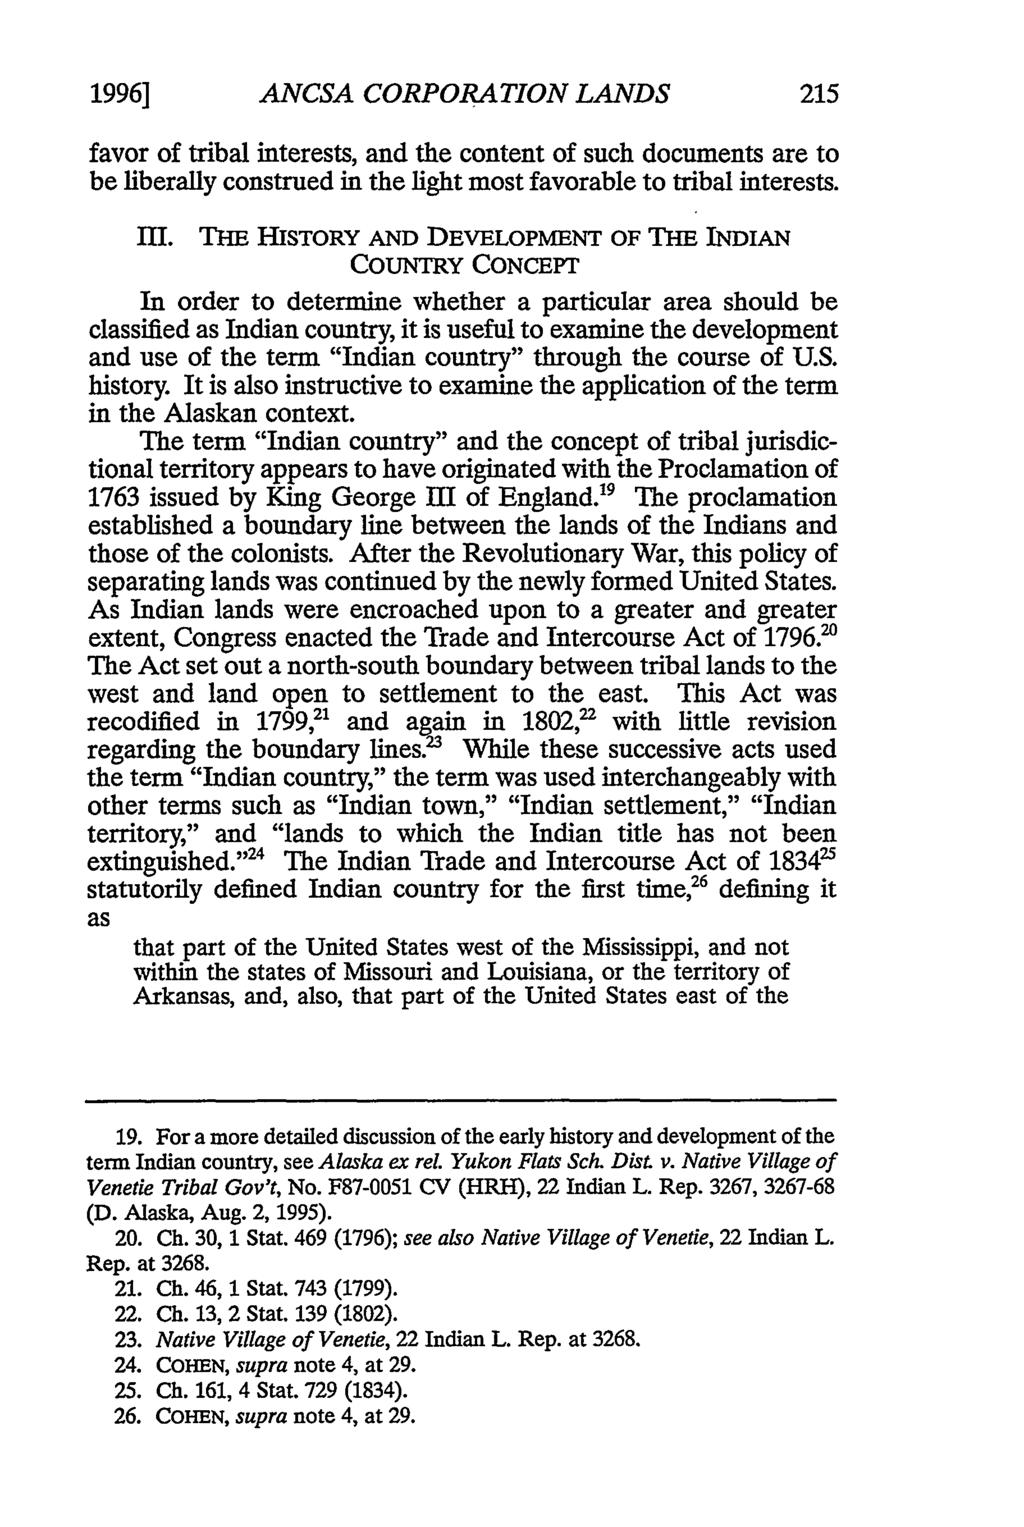 1996] ANCSA CORPORATION LANDS favor of tribal interests, and the content of such documents are to be liberally construed in the light most favorable to tribal interests. III.